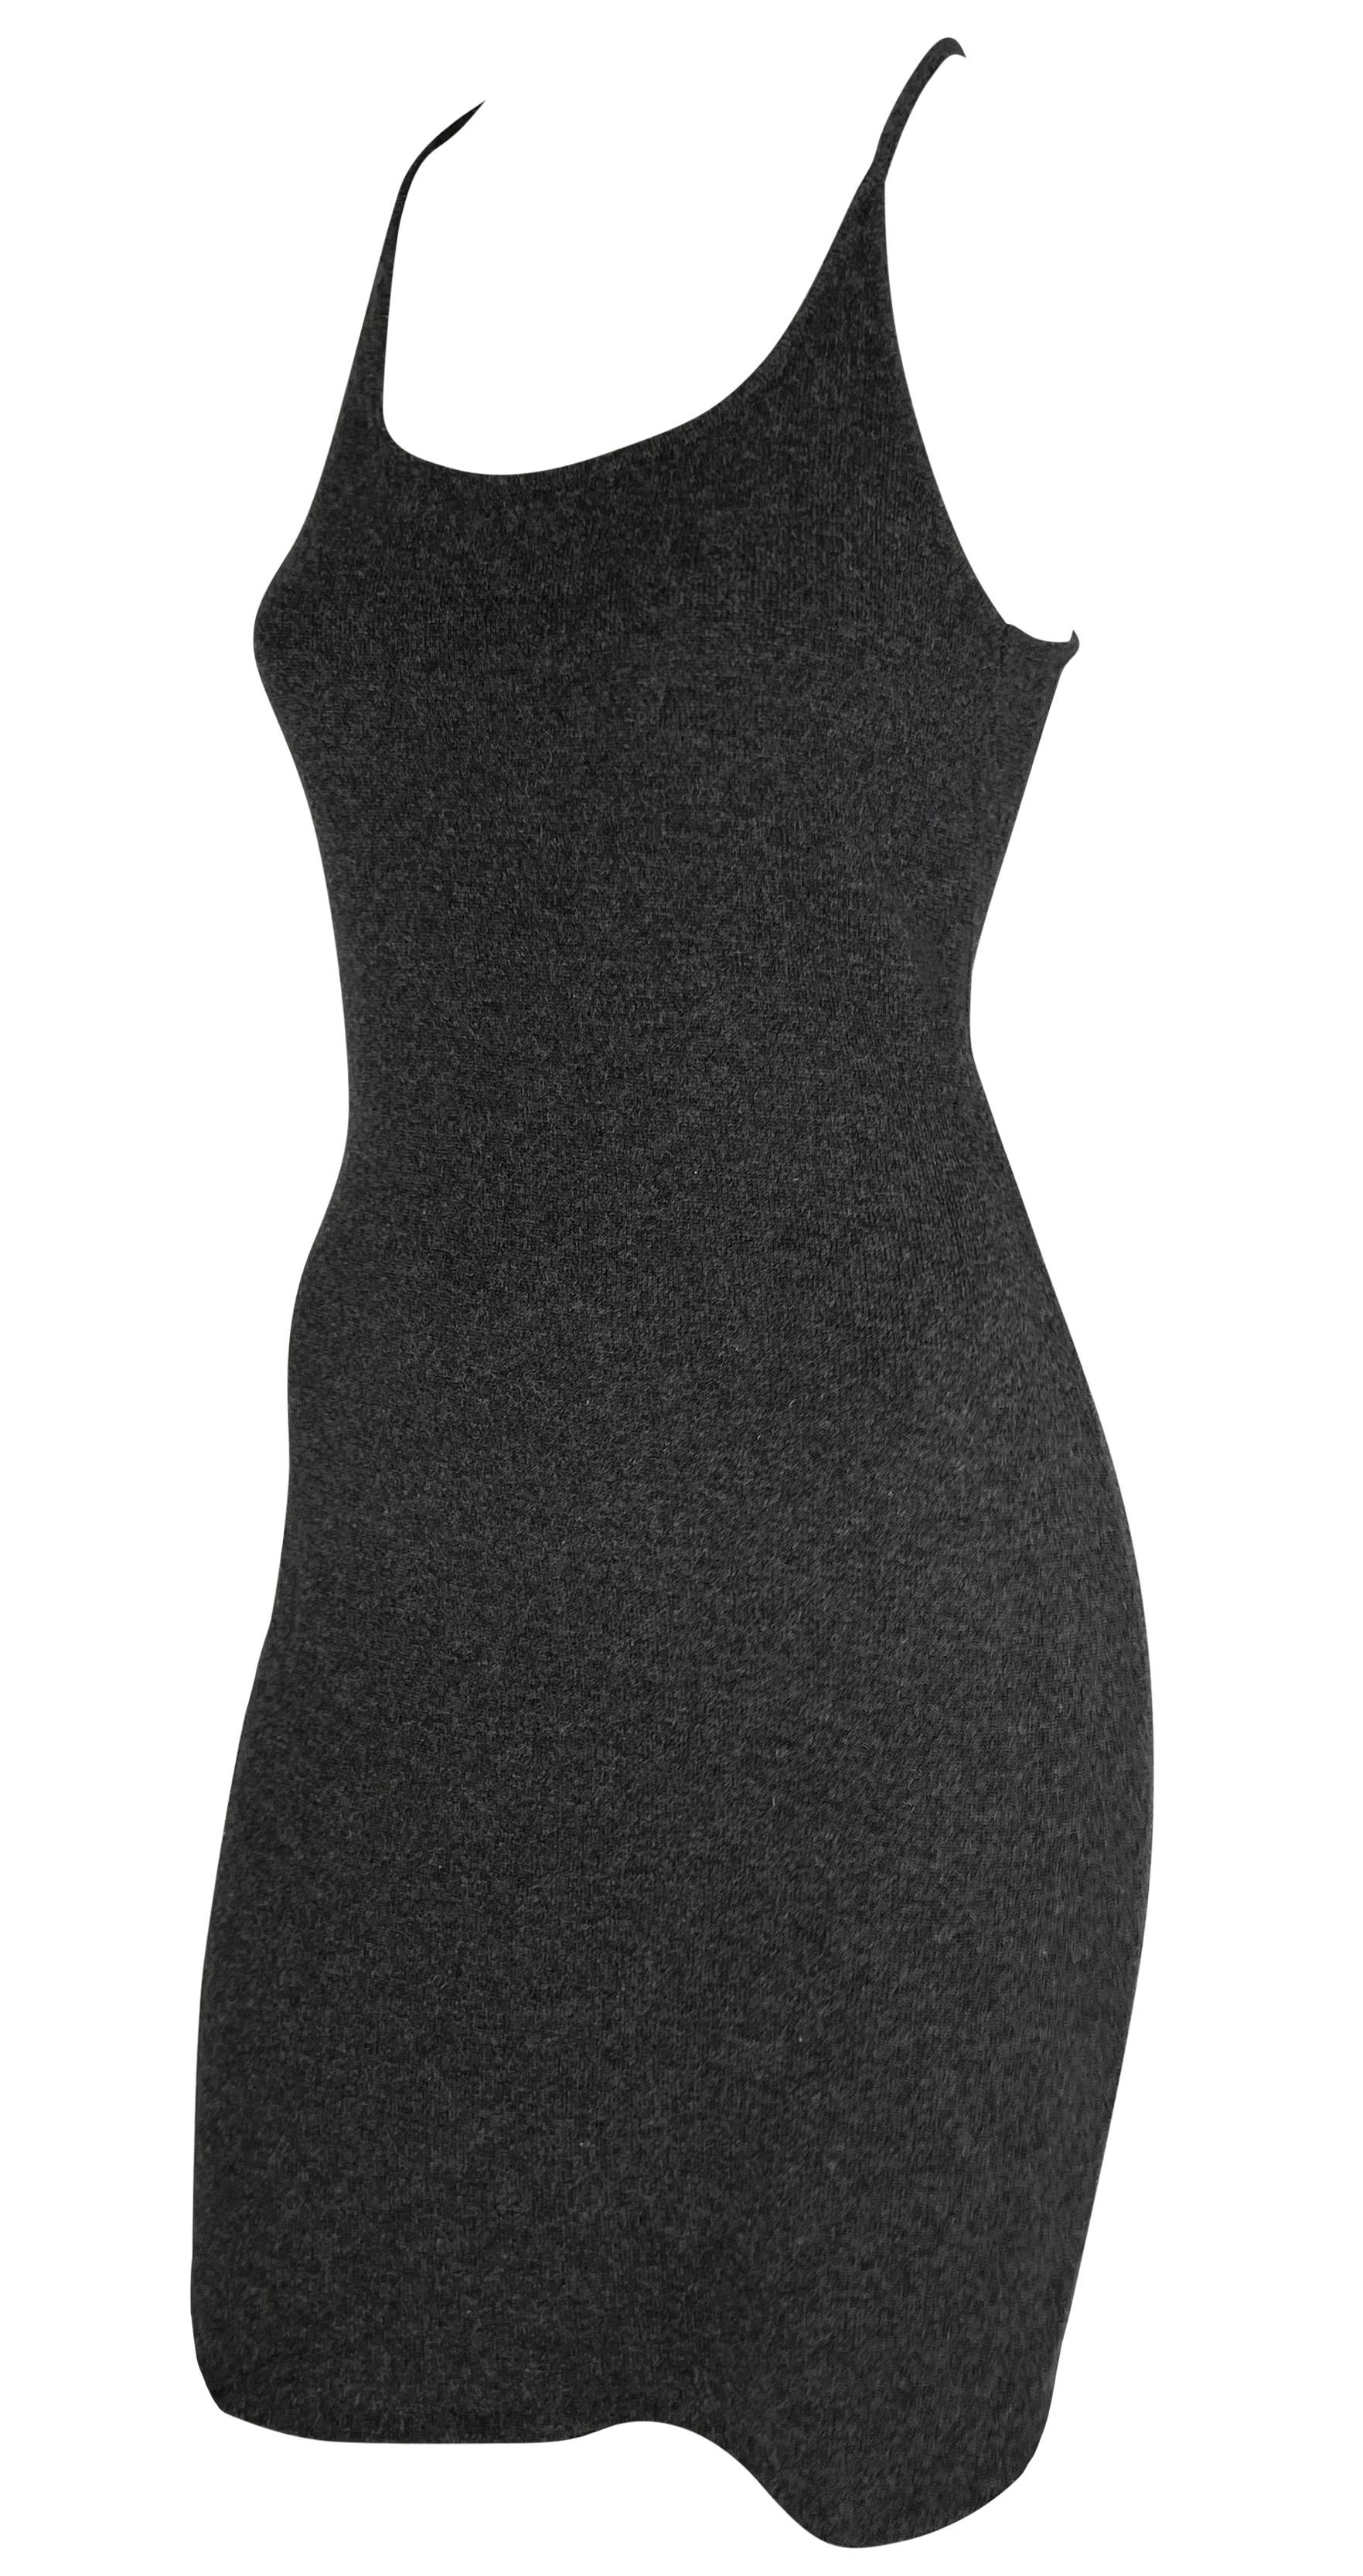 1990s Ralph Lauren Cashmere Knit Backless Charcoal Grey Bodycon Mini Dress For Sale 2